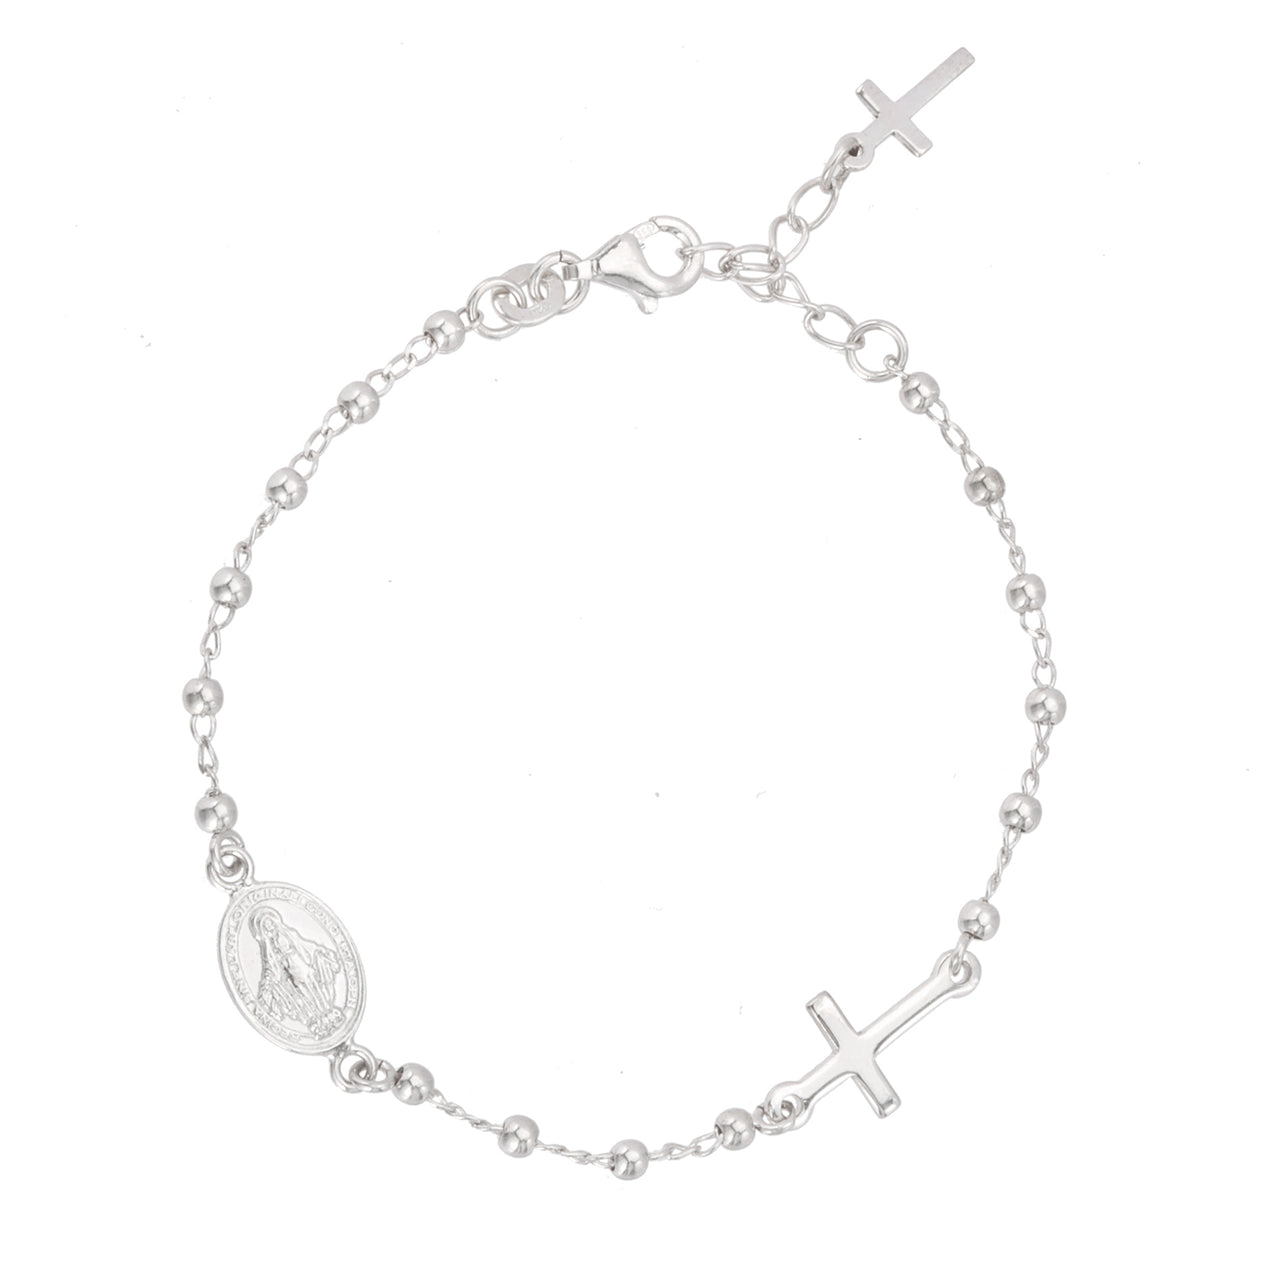 My Bible Cross Charm and Miraculous Medal Station Beaded Chain Bracelet